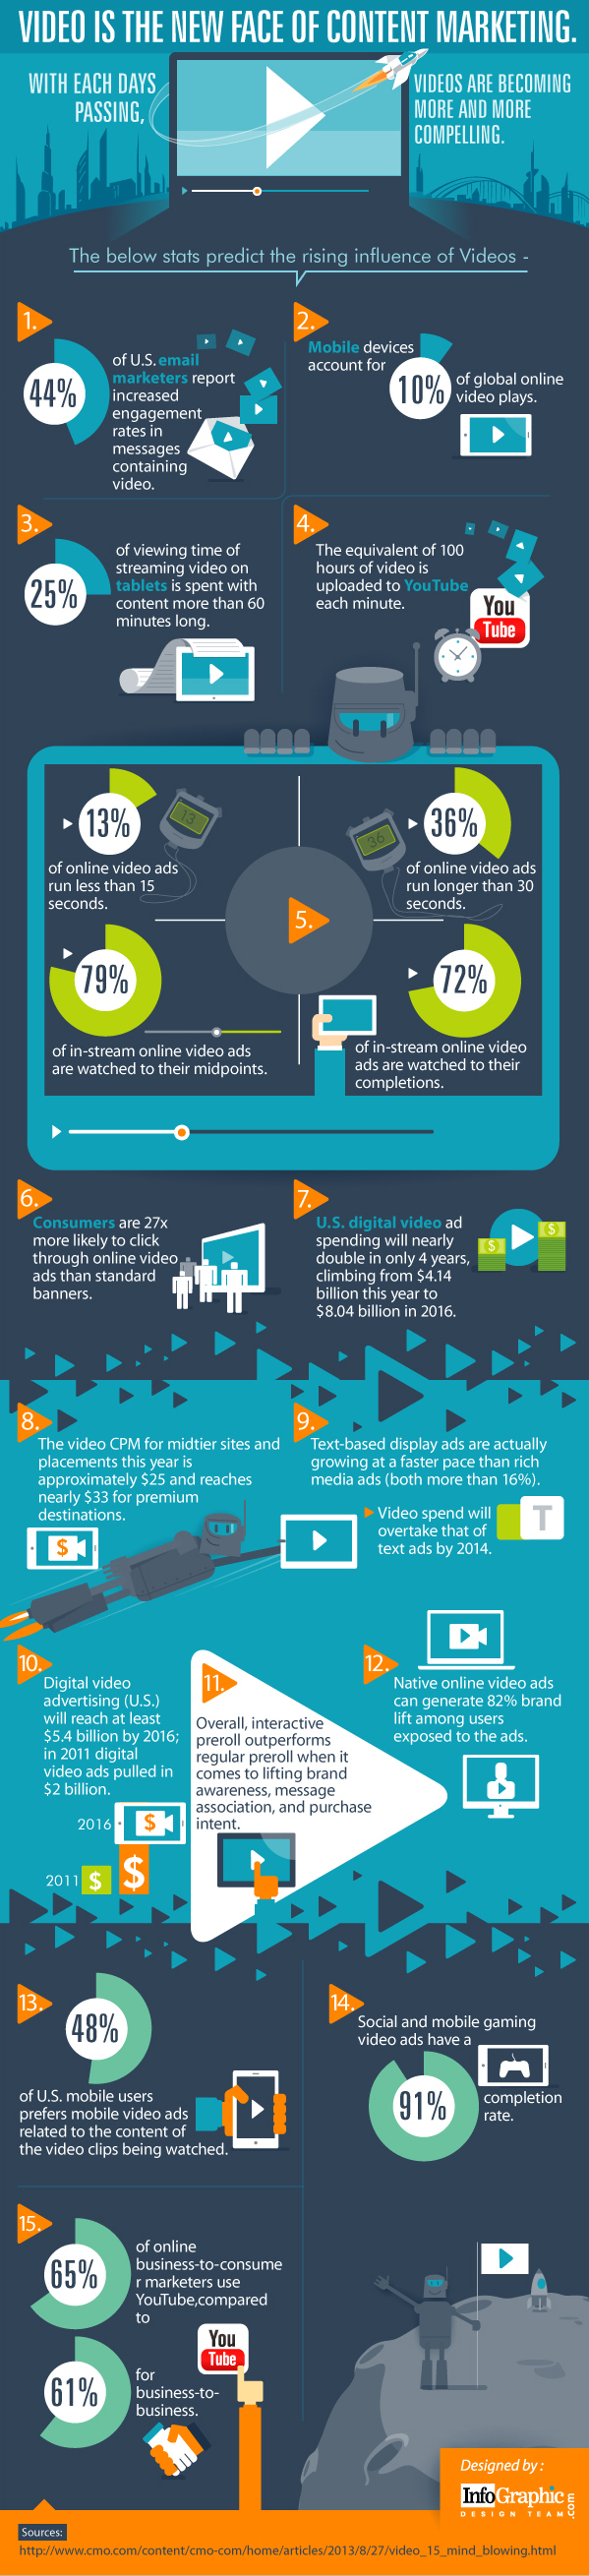 infographic embed video marketing